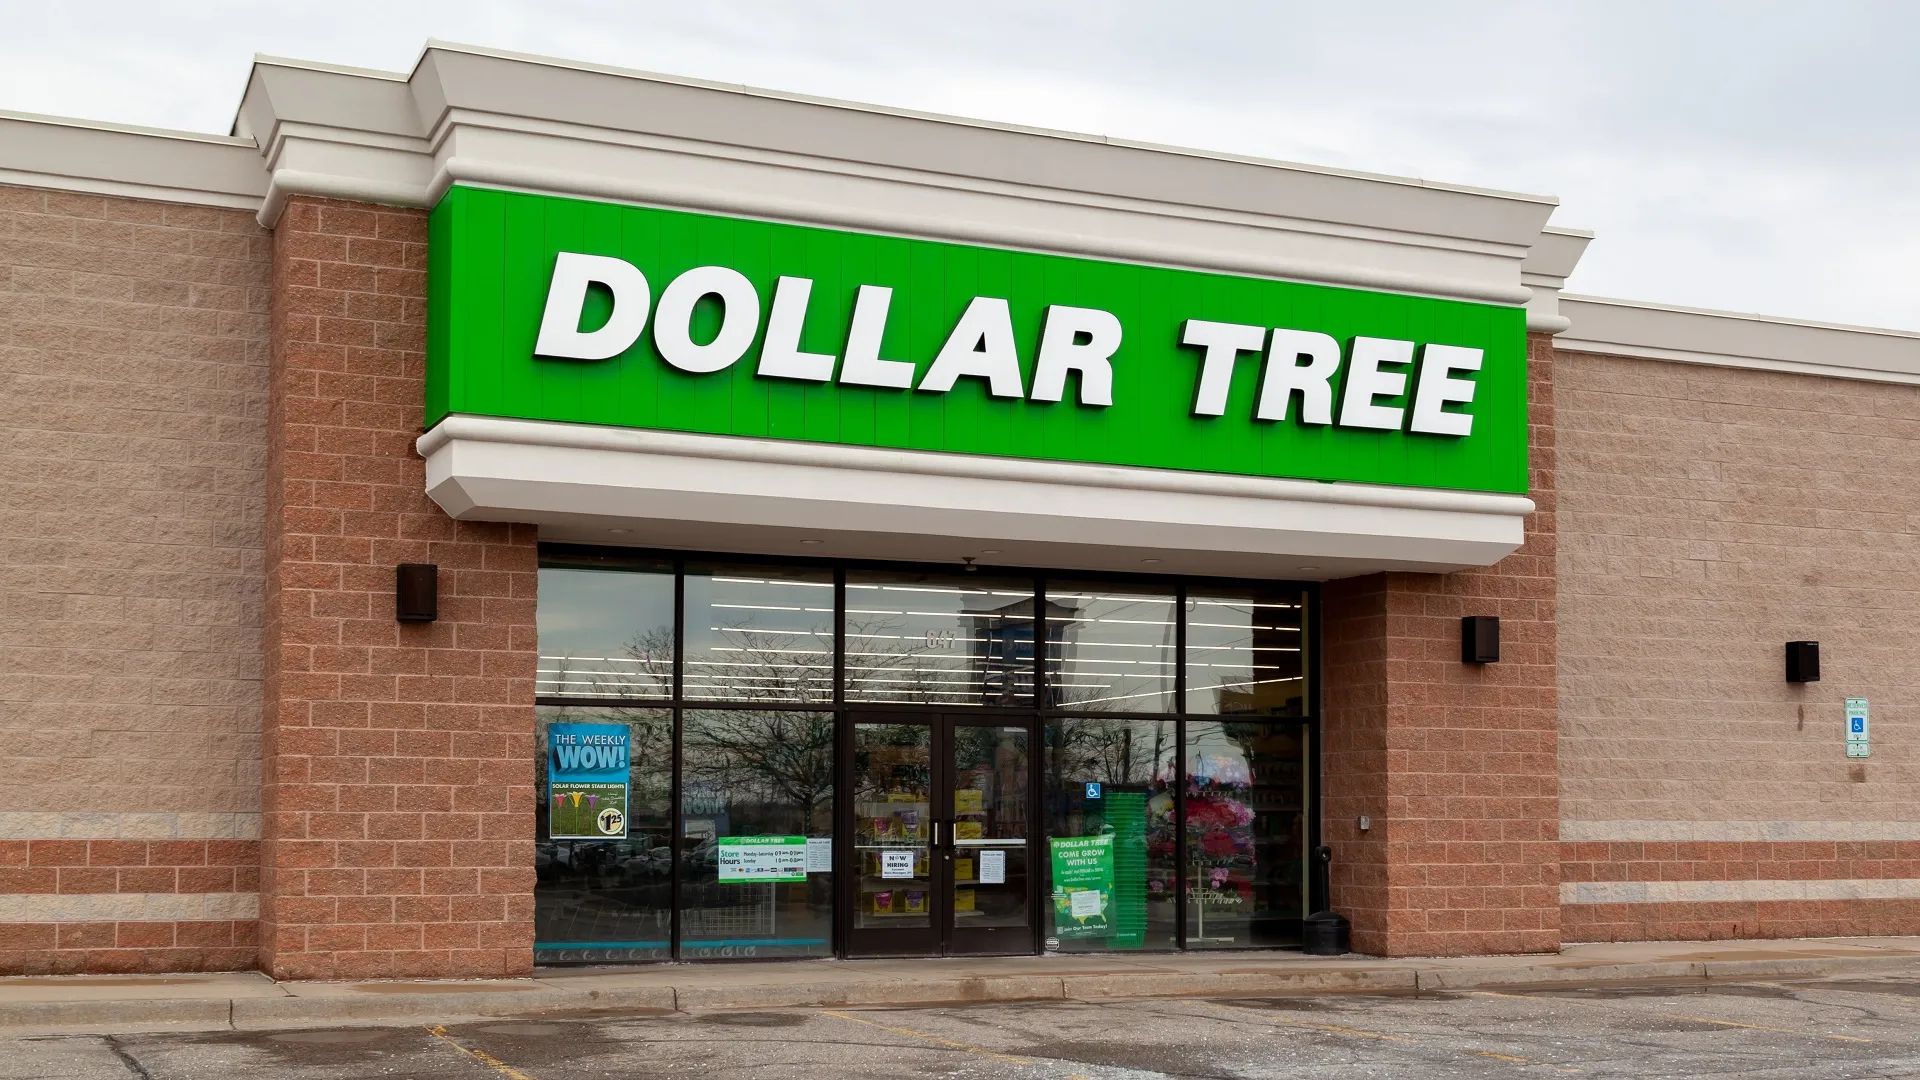 11 Best Dollar Tree Items To Stock Up On for Valentine's Day ...